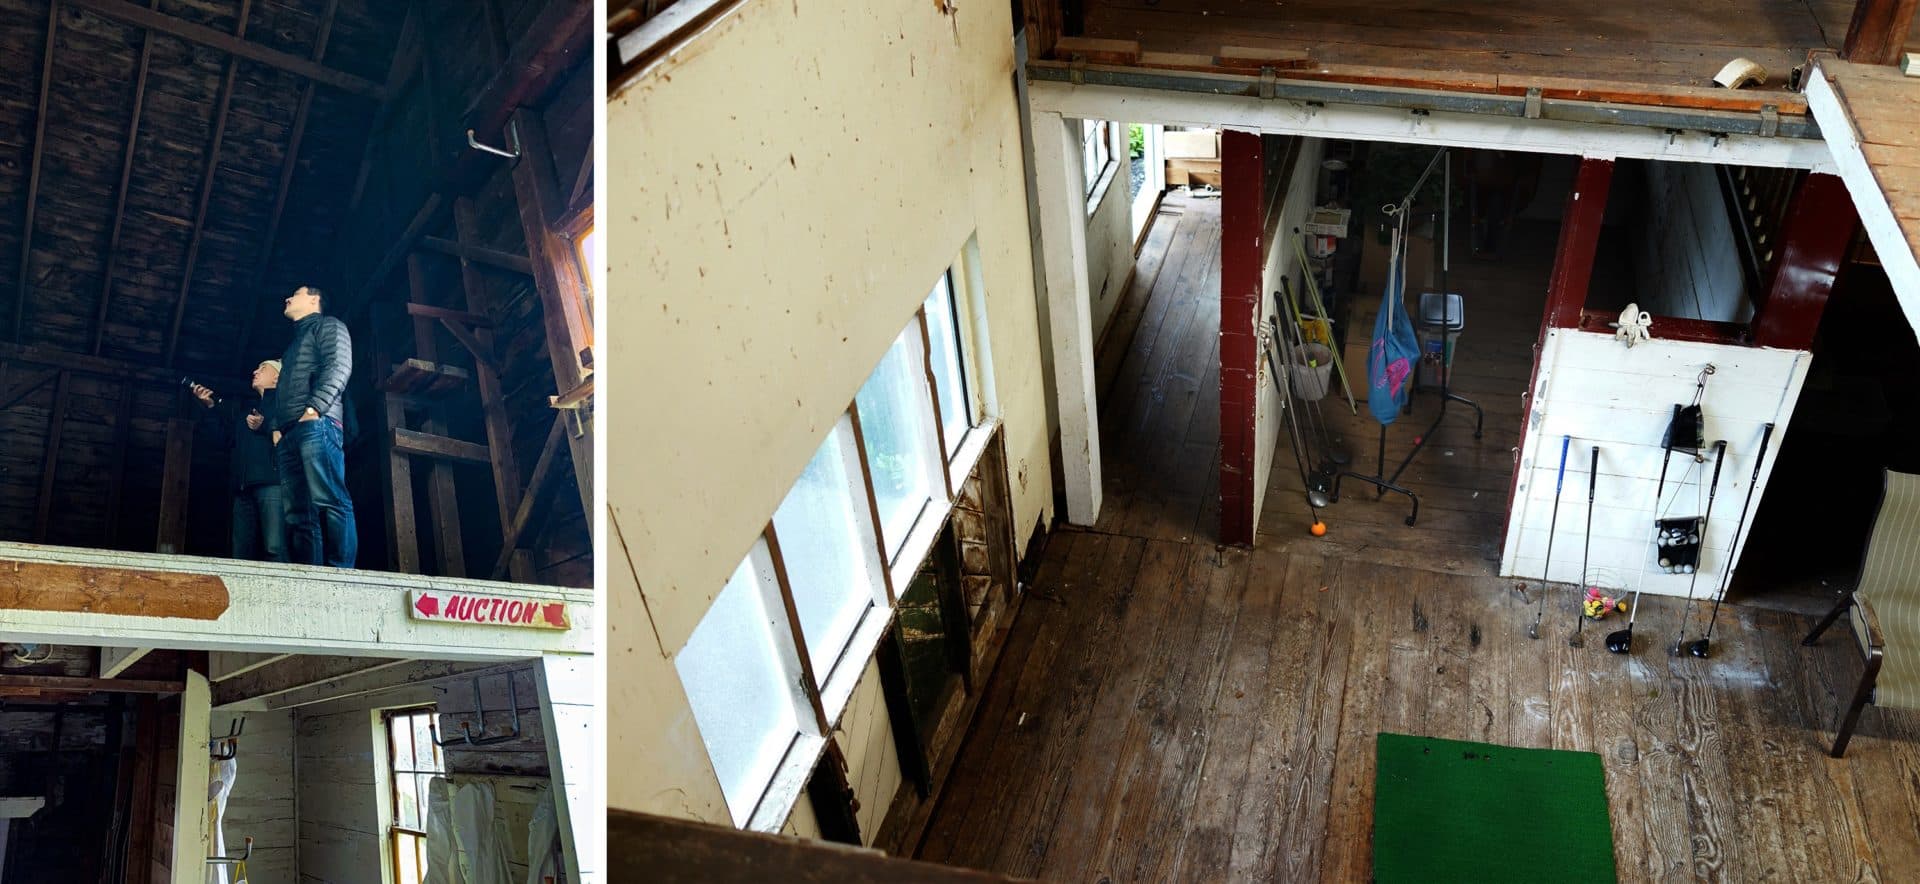 (Left) Architect Andres Bernal, right, and structural engineer Stanislav Berdichevsky, discuss the remodeling of a 100-year-old horse barn. (Right) View of the interior of the barn from above. (Simón Ríos/WBUR)